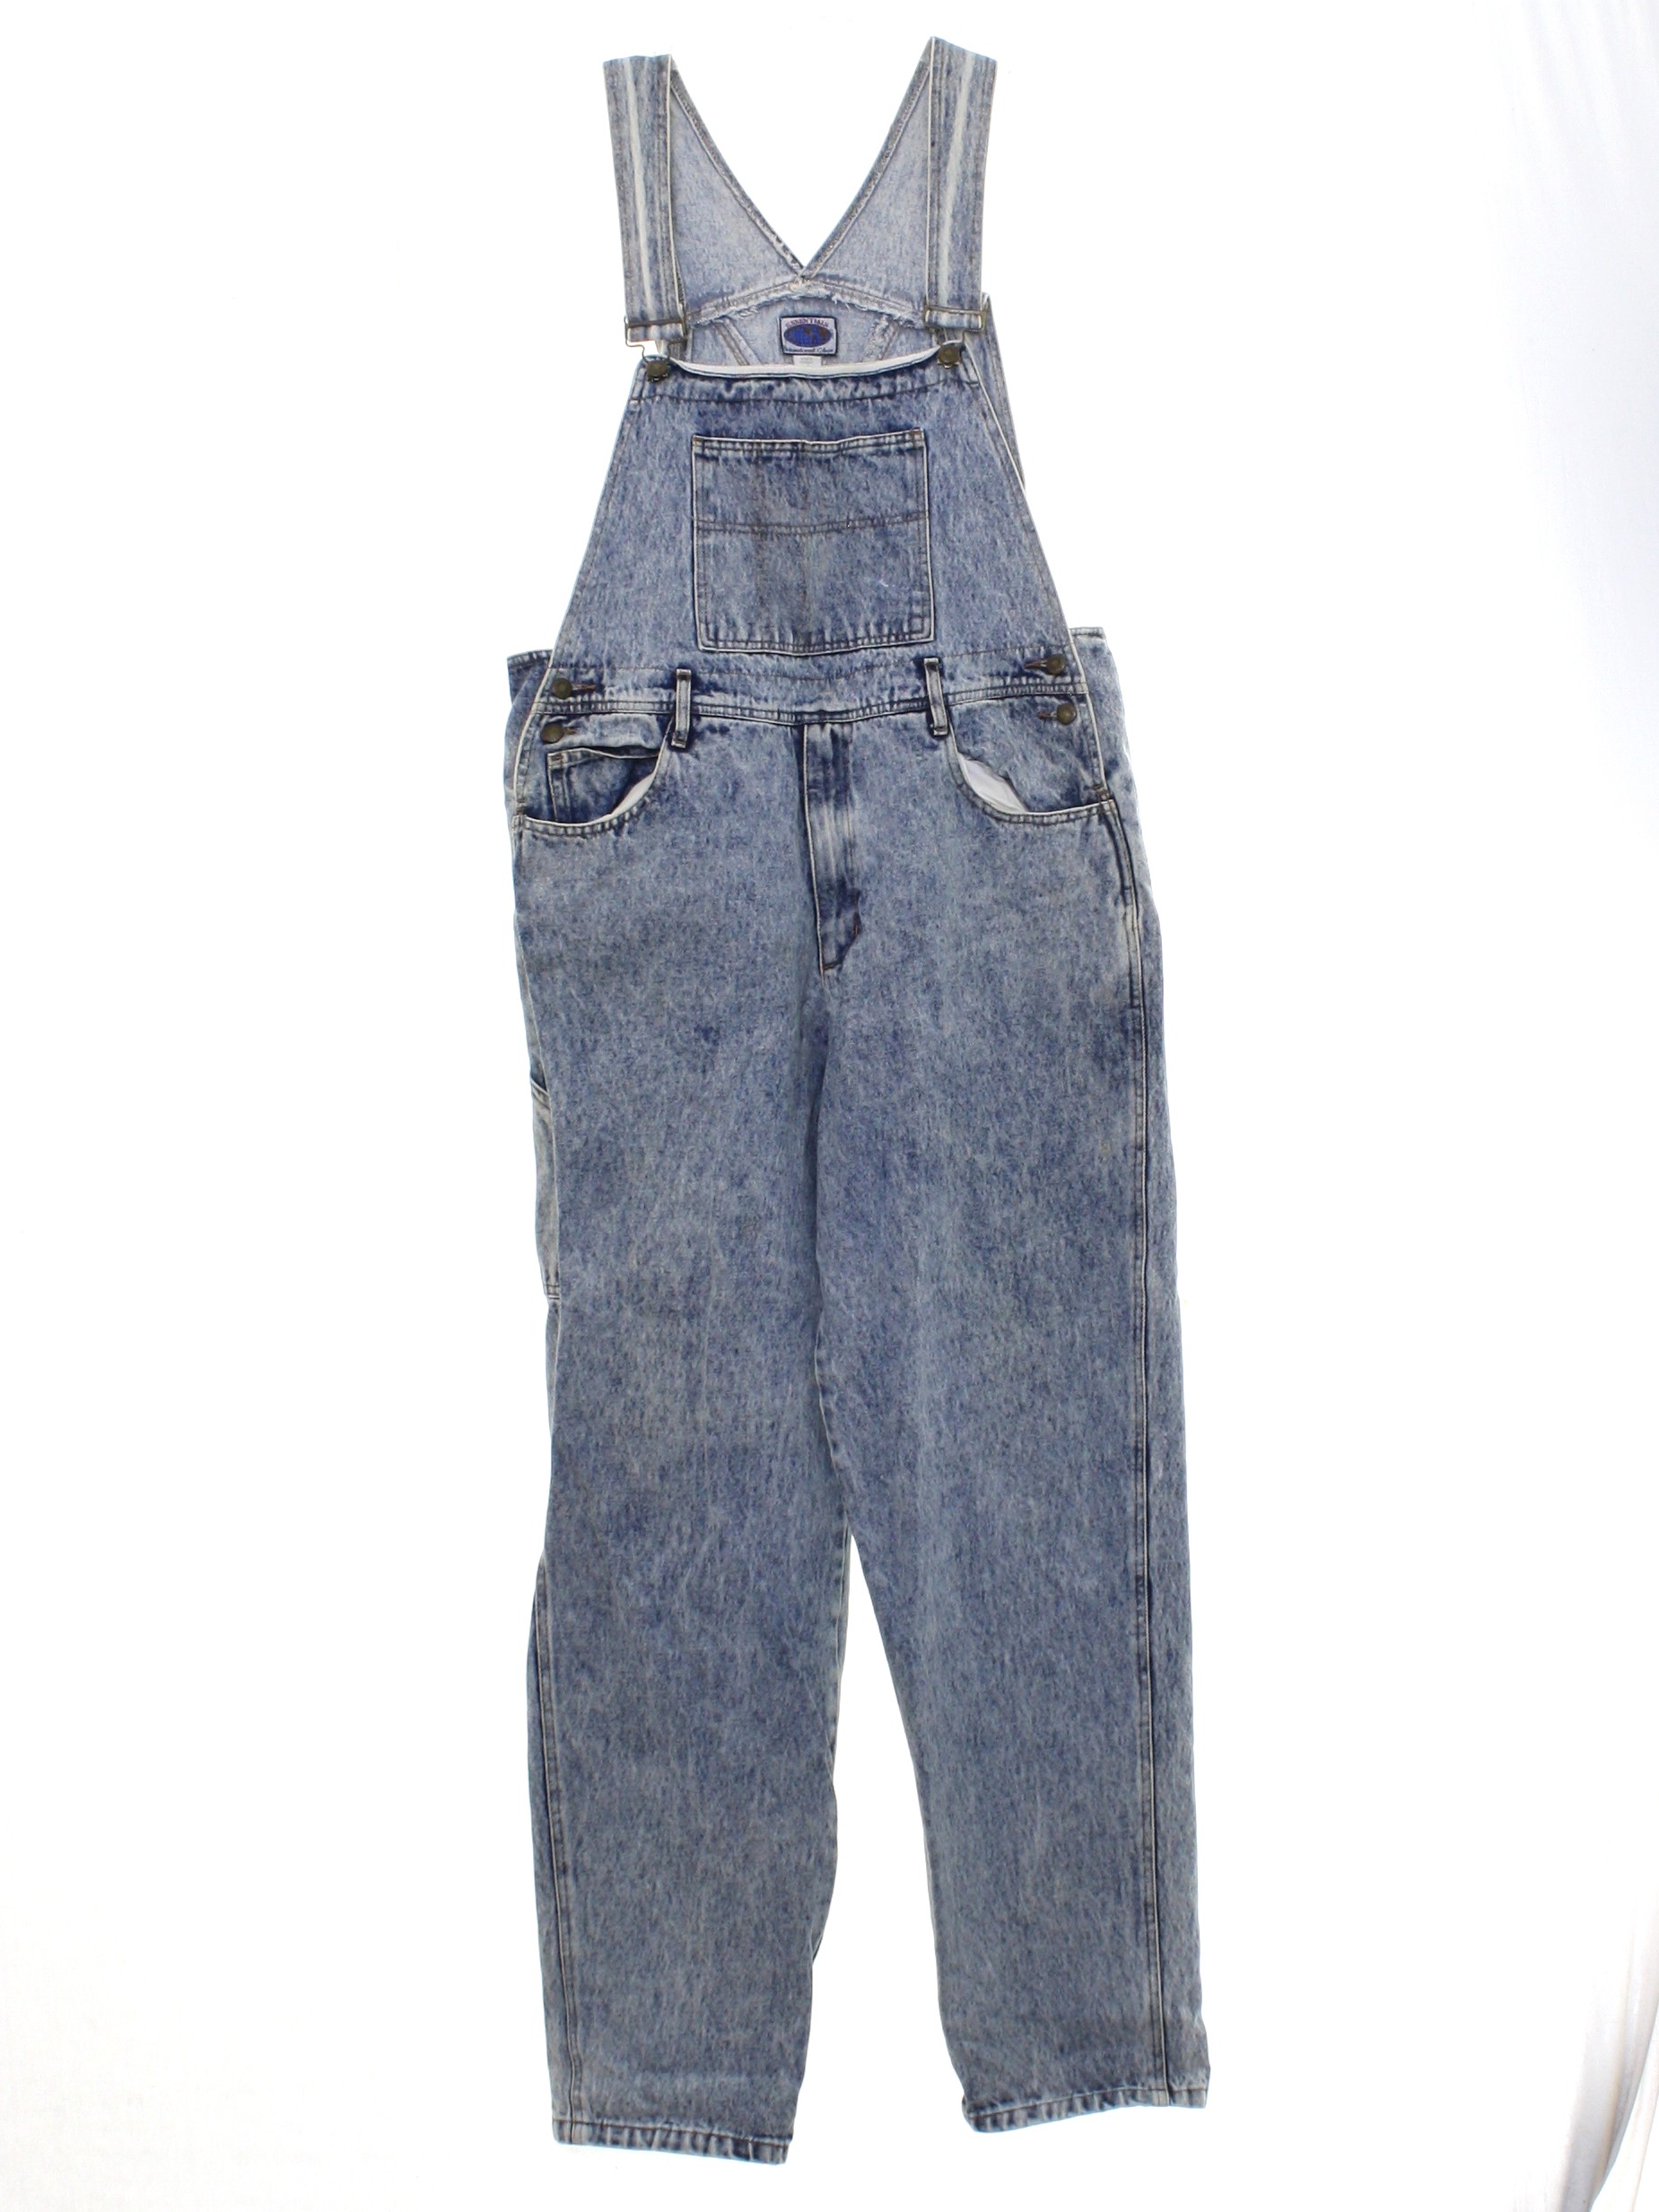 Vintage 80s Overalls: 80s style (made in 90s) -Essentials International  Choice- Mens stone washed worn and yellowed dark blue cotton denim acid  wash denim slightly tapered leg overalls with zipper fly closure